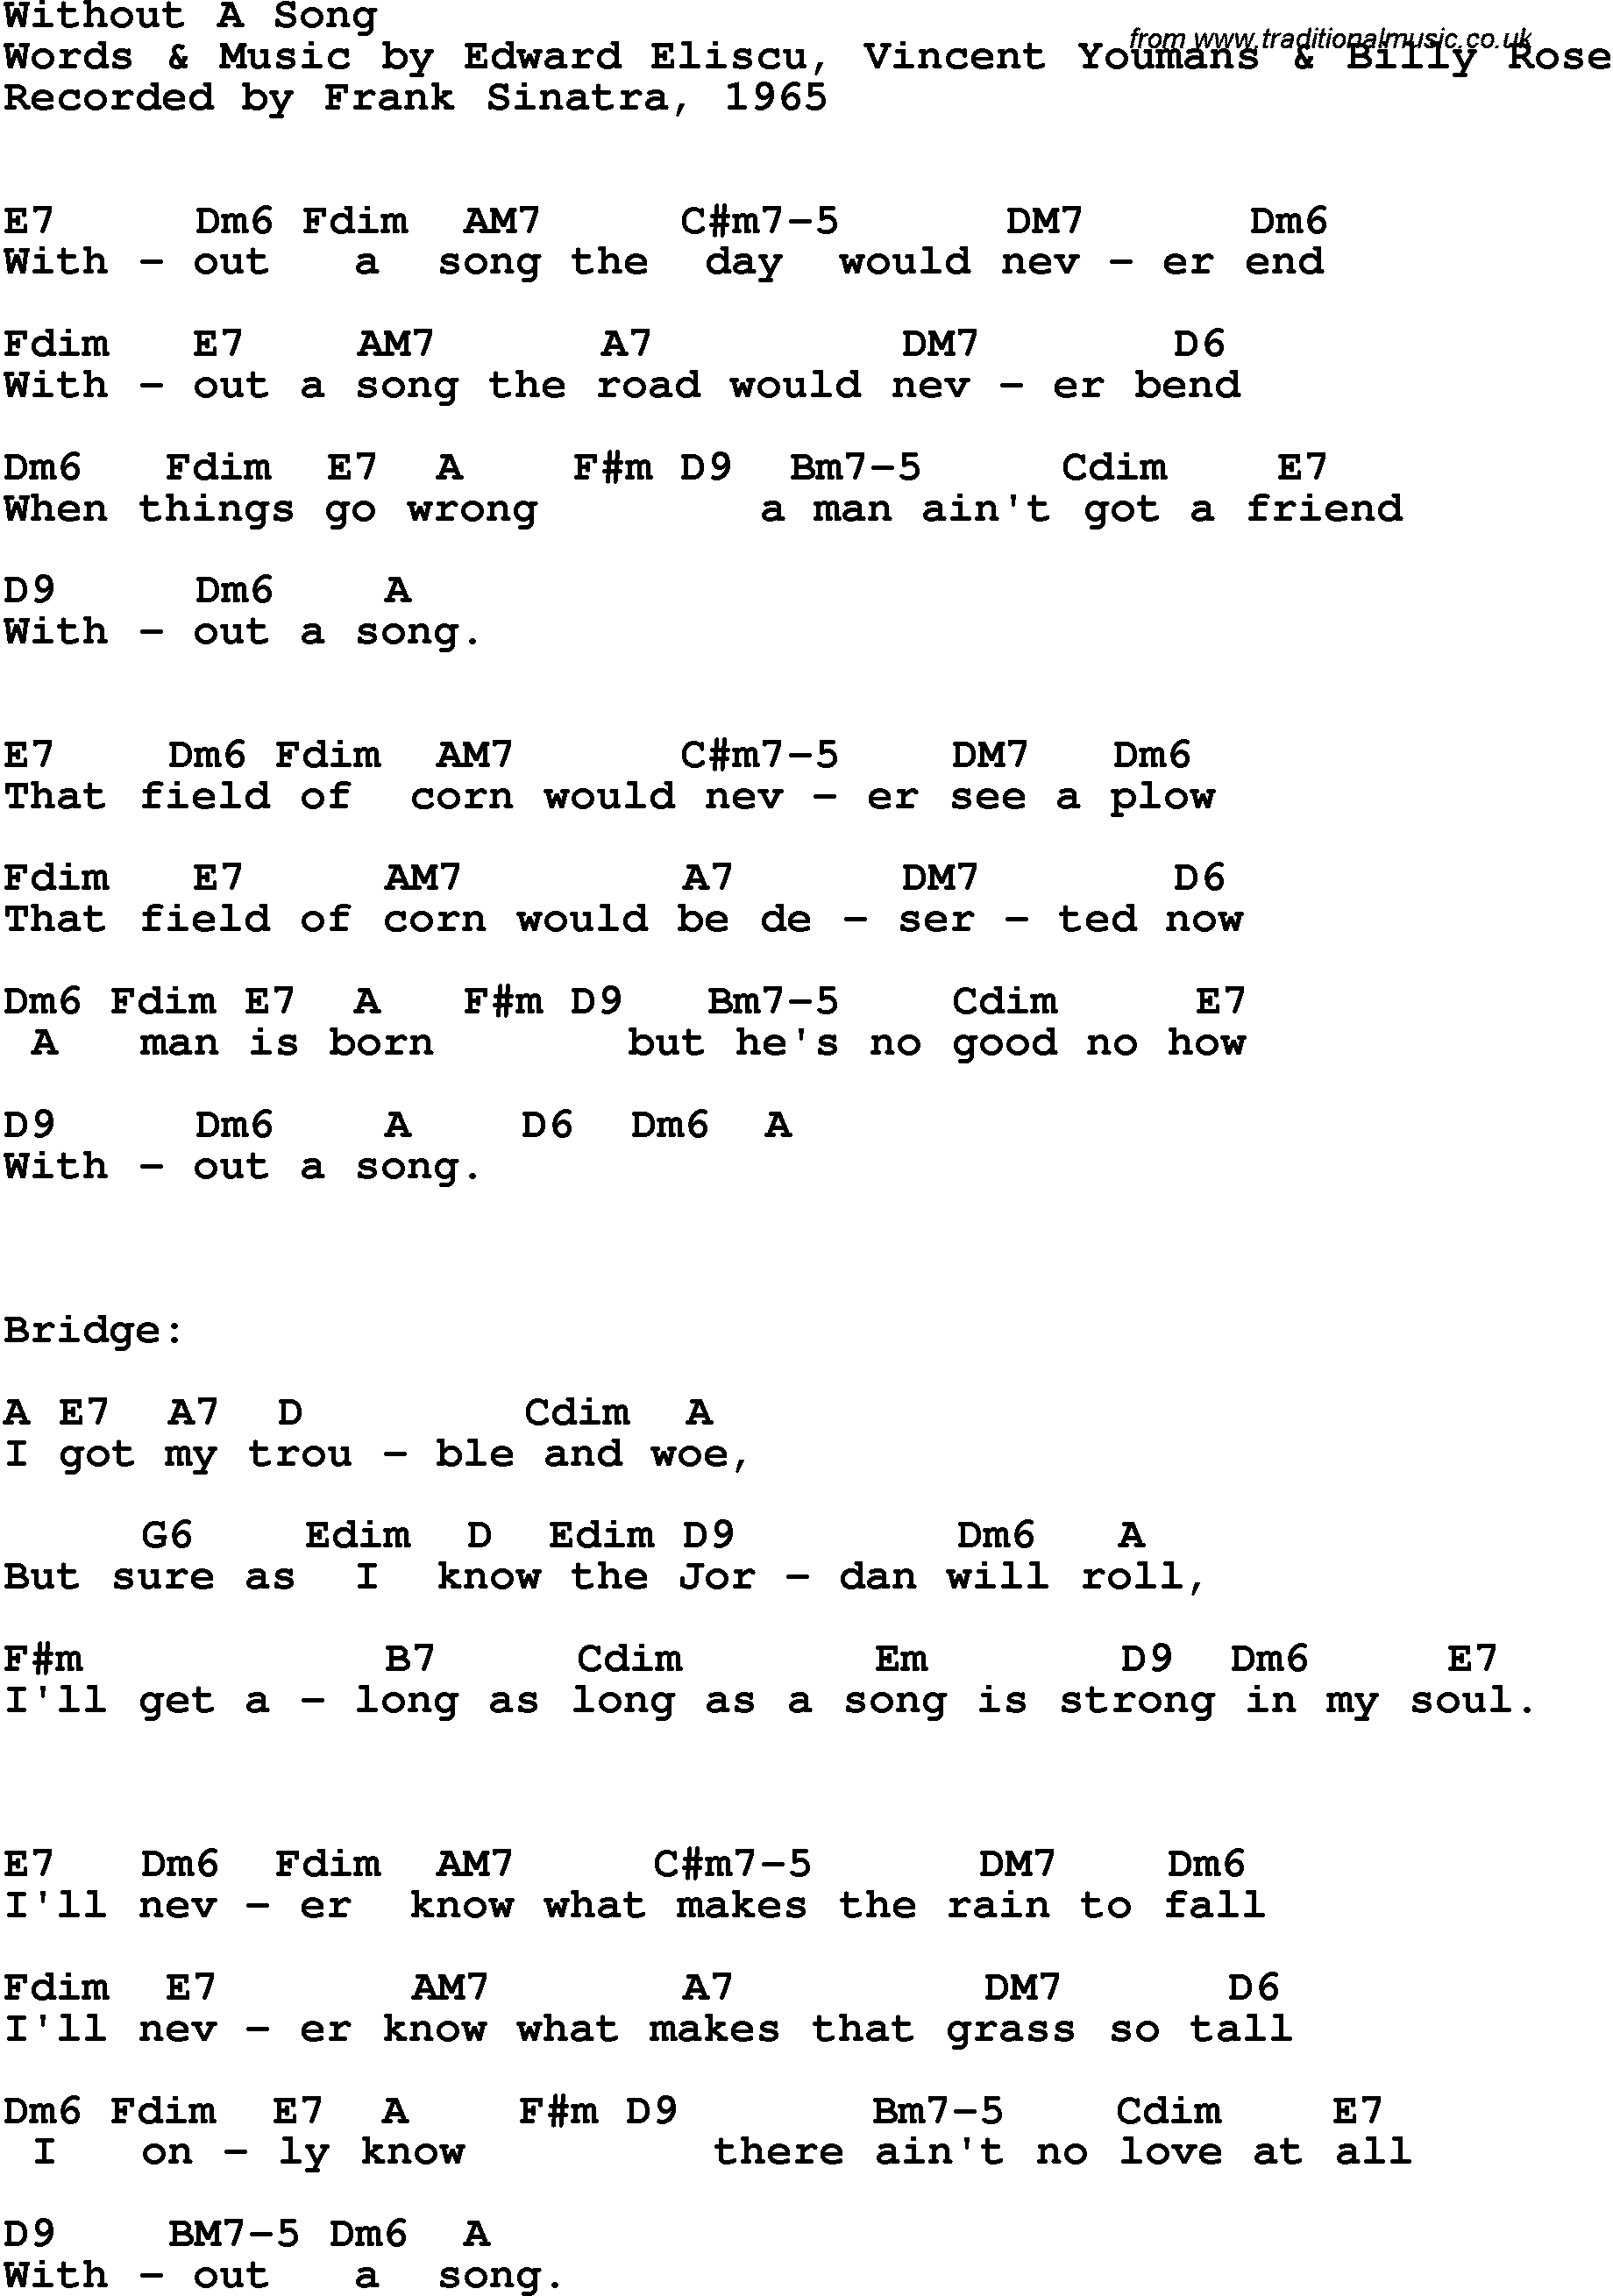 Song Lyrics with guitar chords for Without A Song - Frank Sinatra, 1965